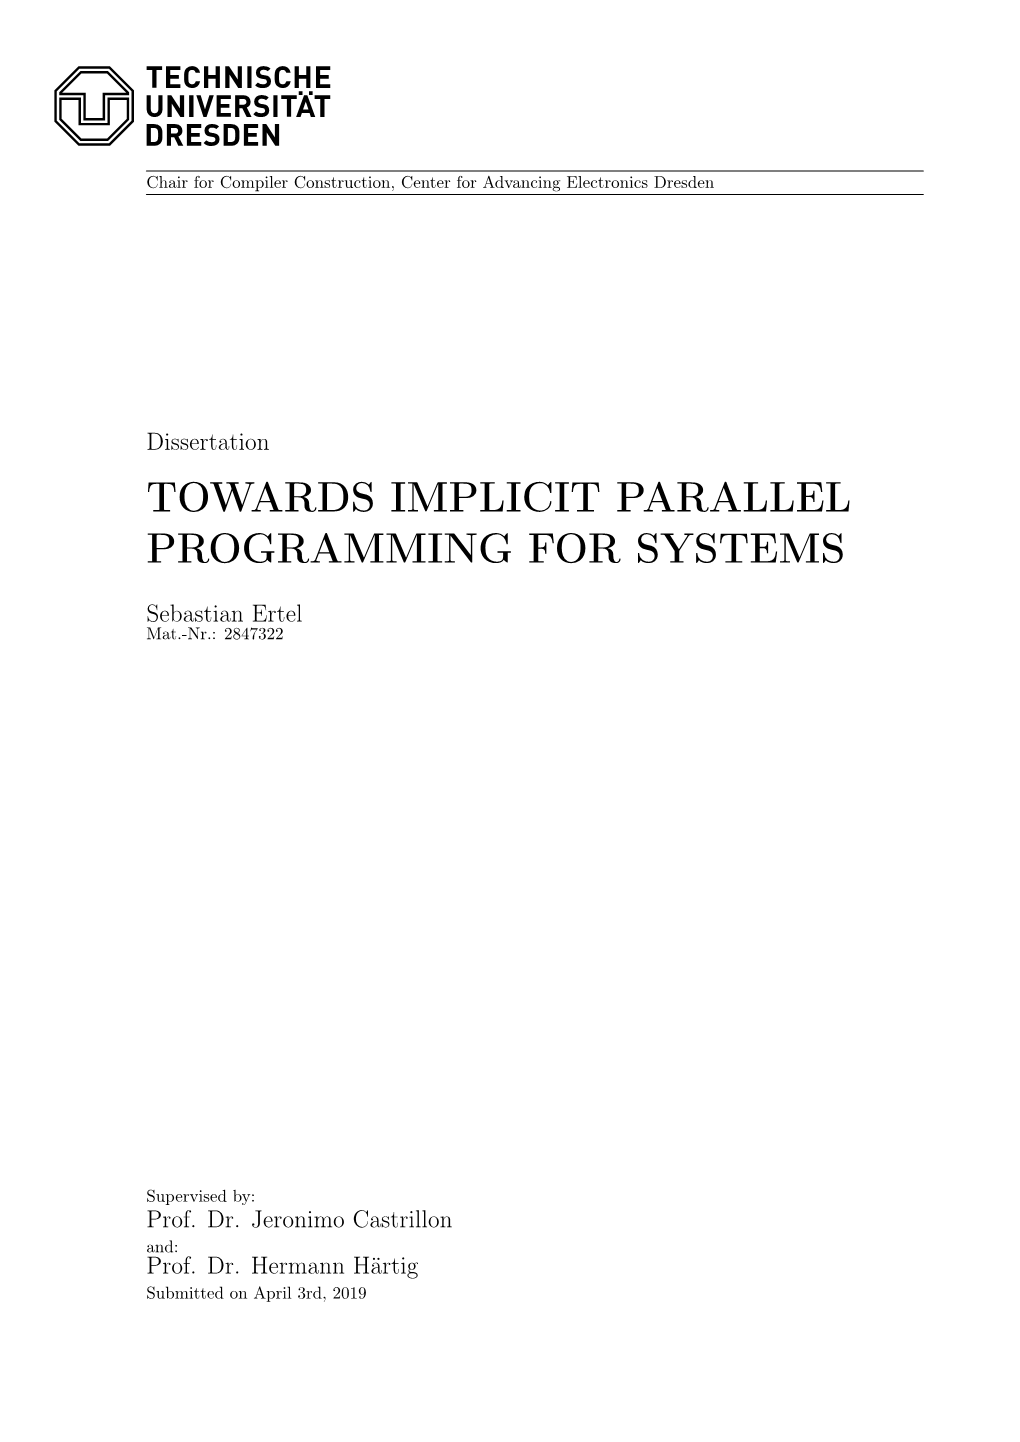 Towards Implicit Parallel Programming for Systems